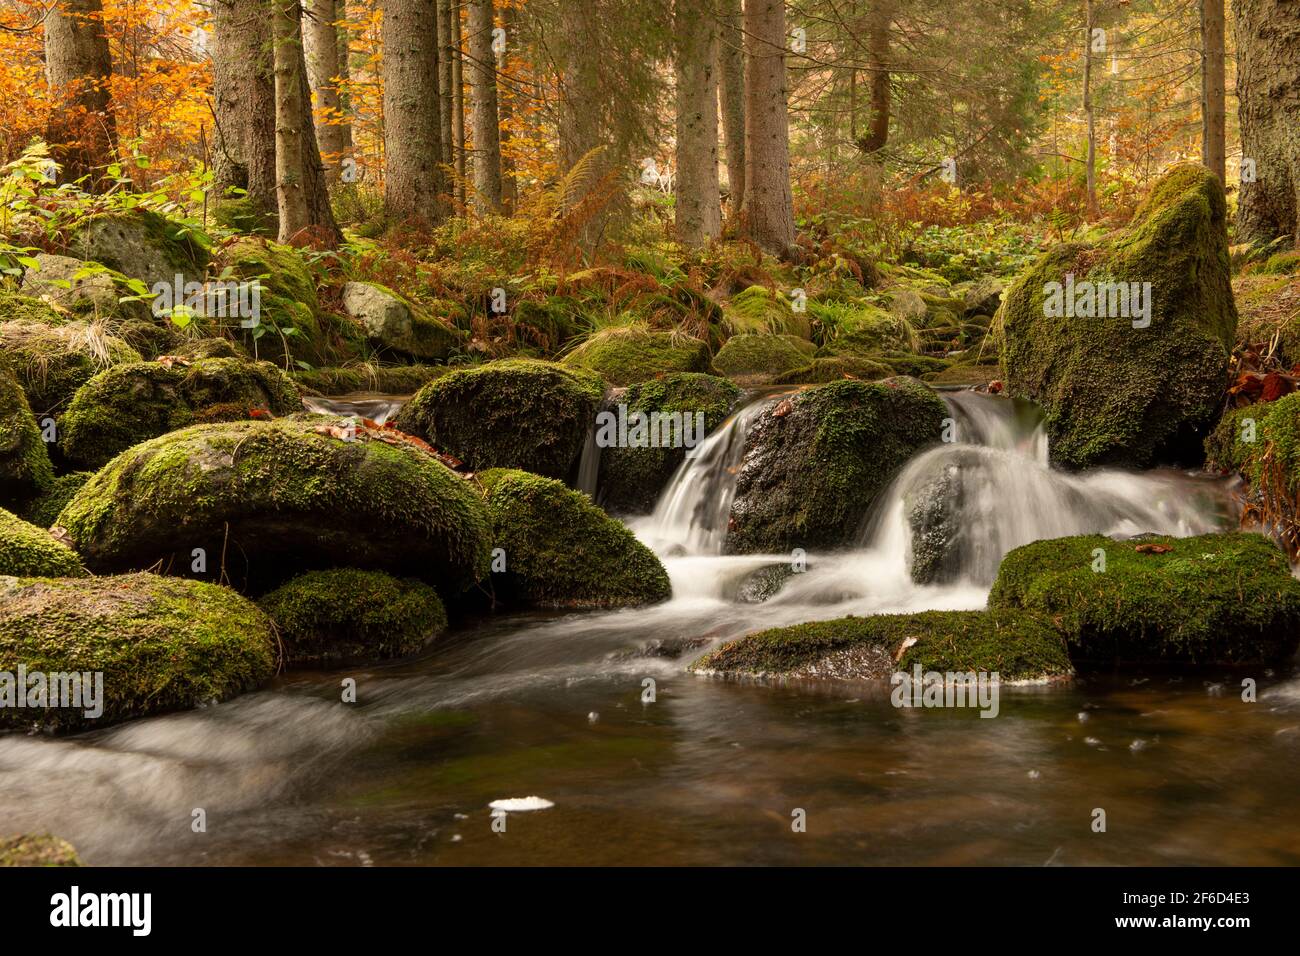 Trees, rocks and a running river is a pretty idyllic autumn forest Stock Photo